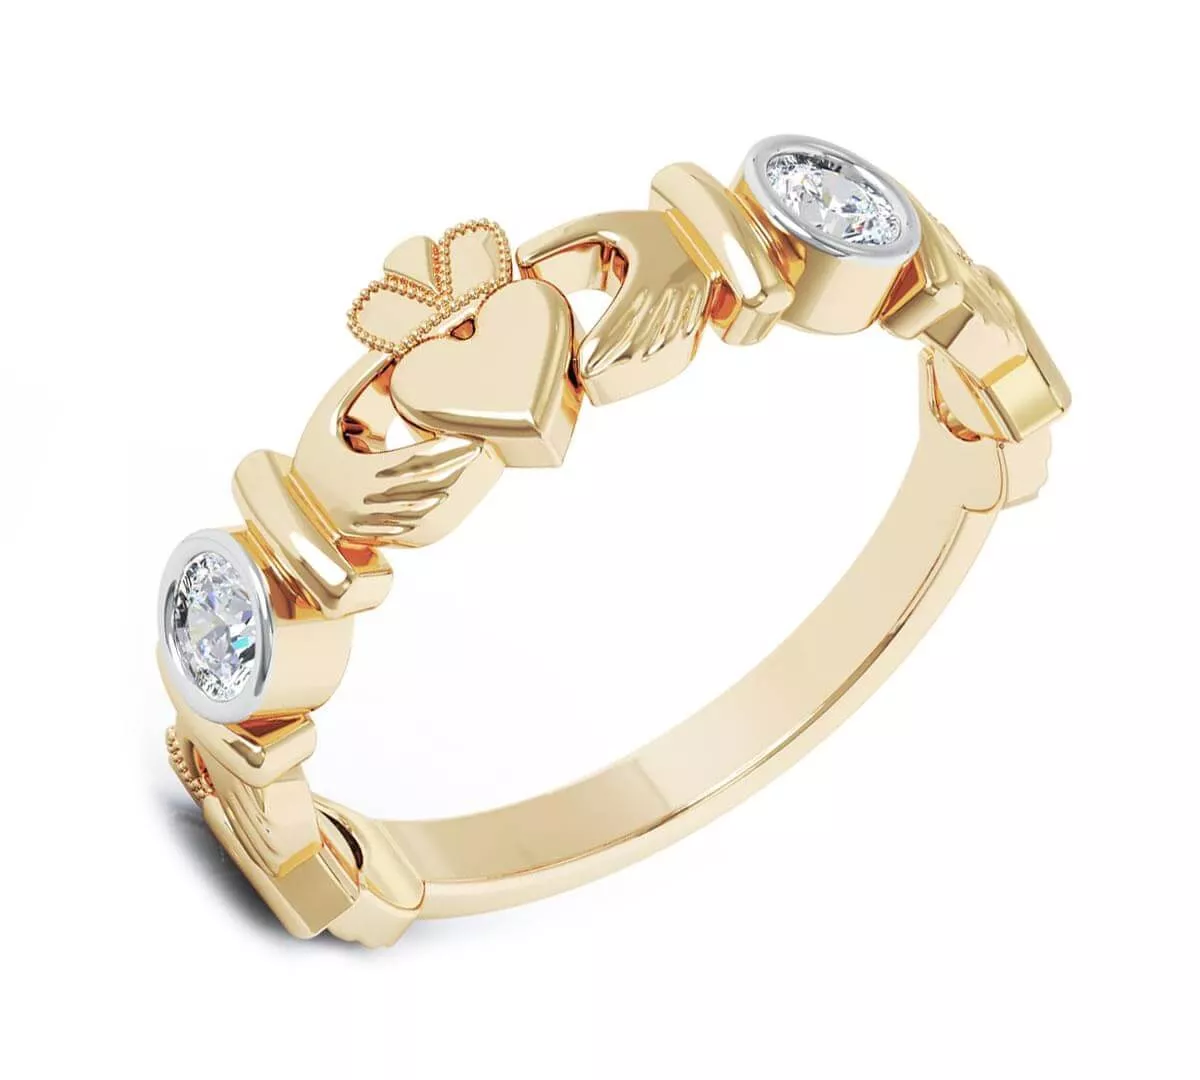  Gold and Diamond Claddagh Ring